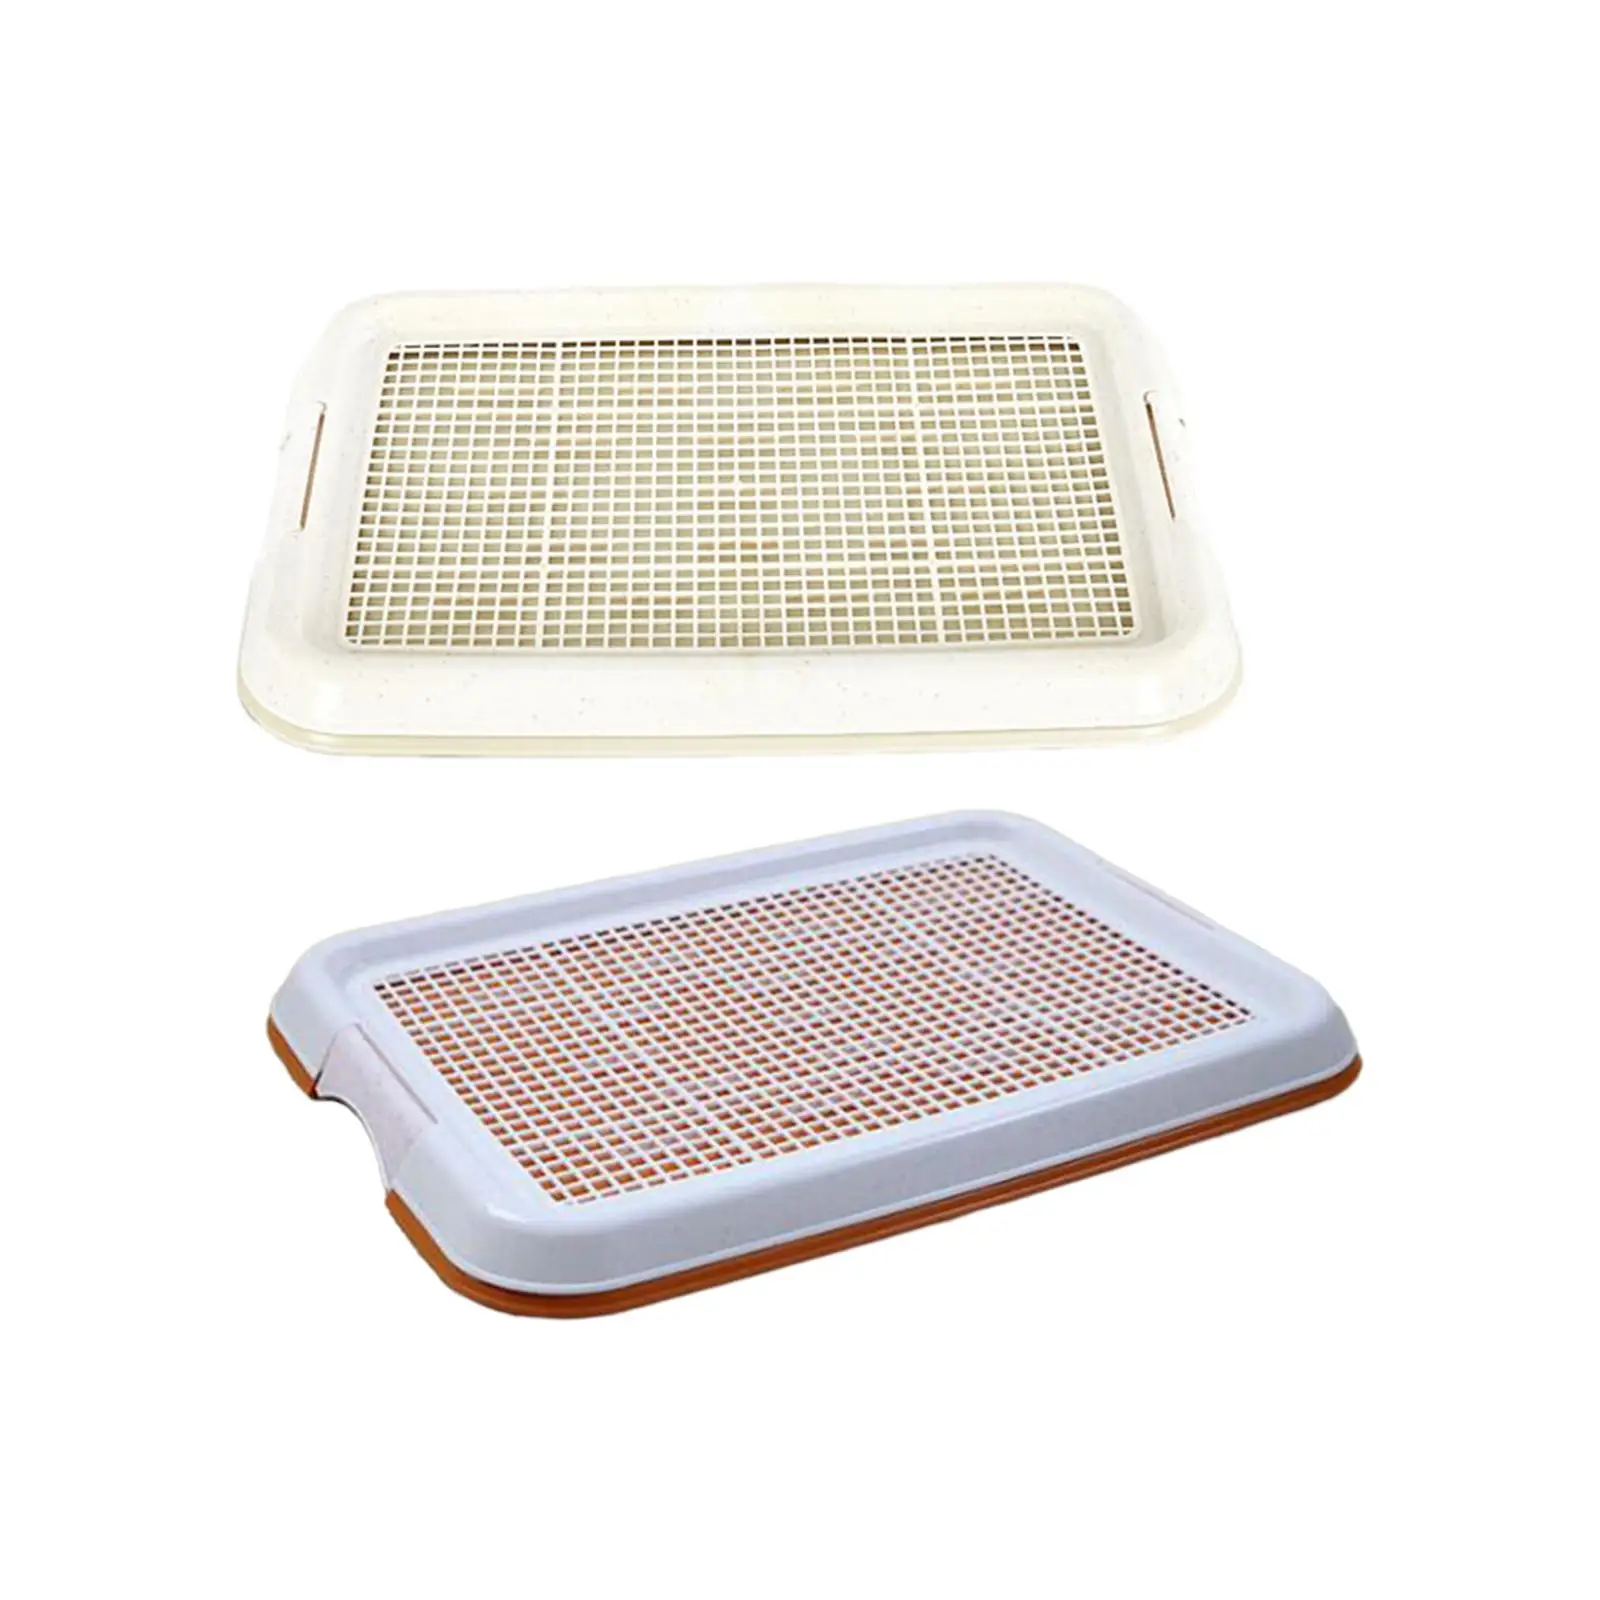 Dog Potty Toilet Training Tray Easy to Clean 18.5